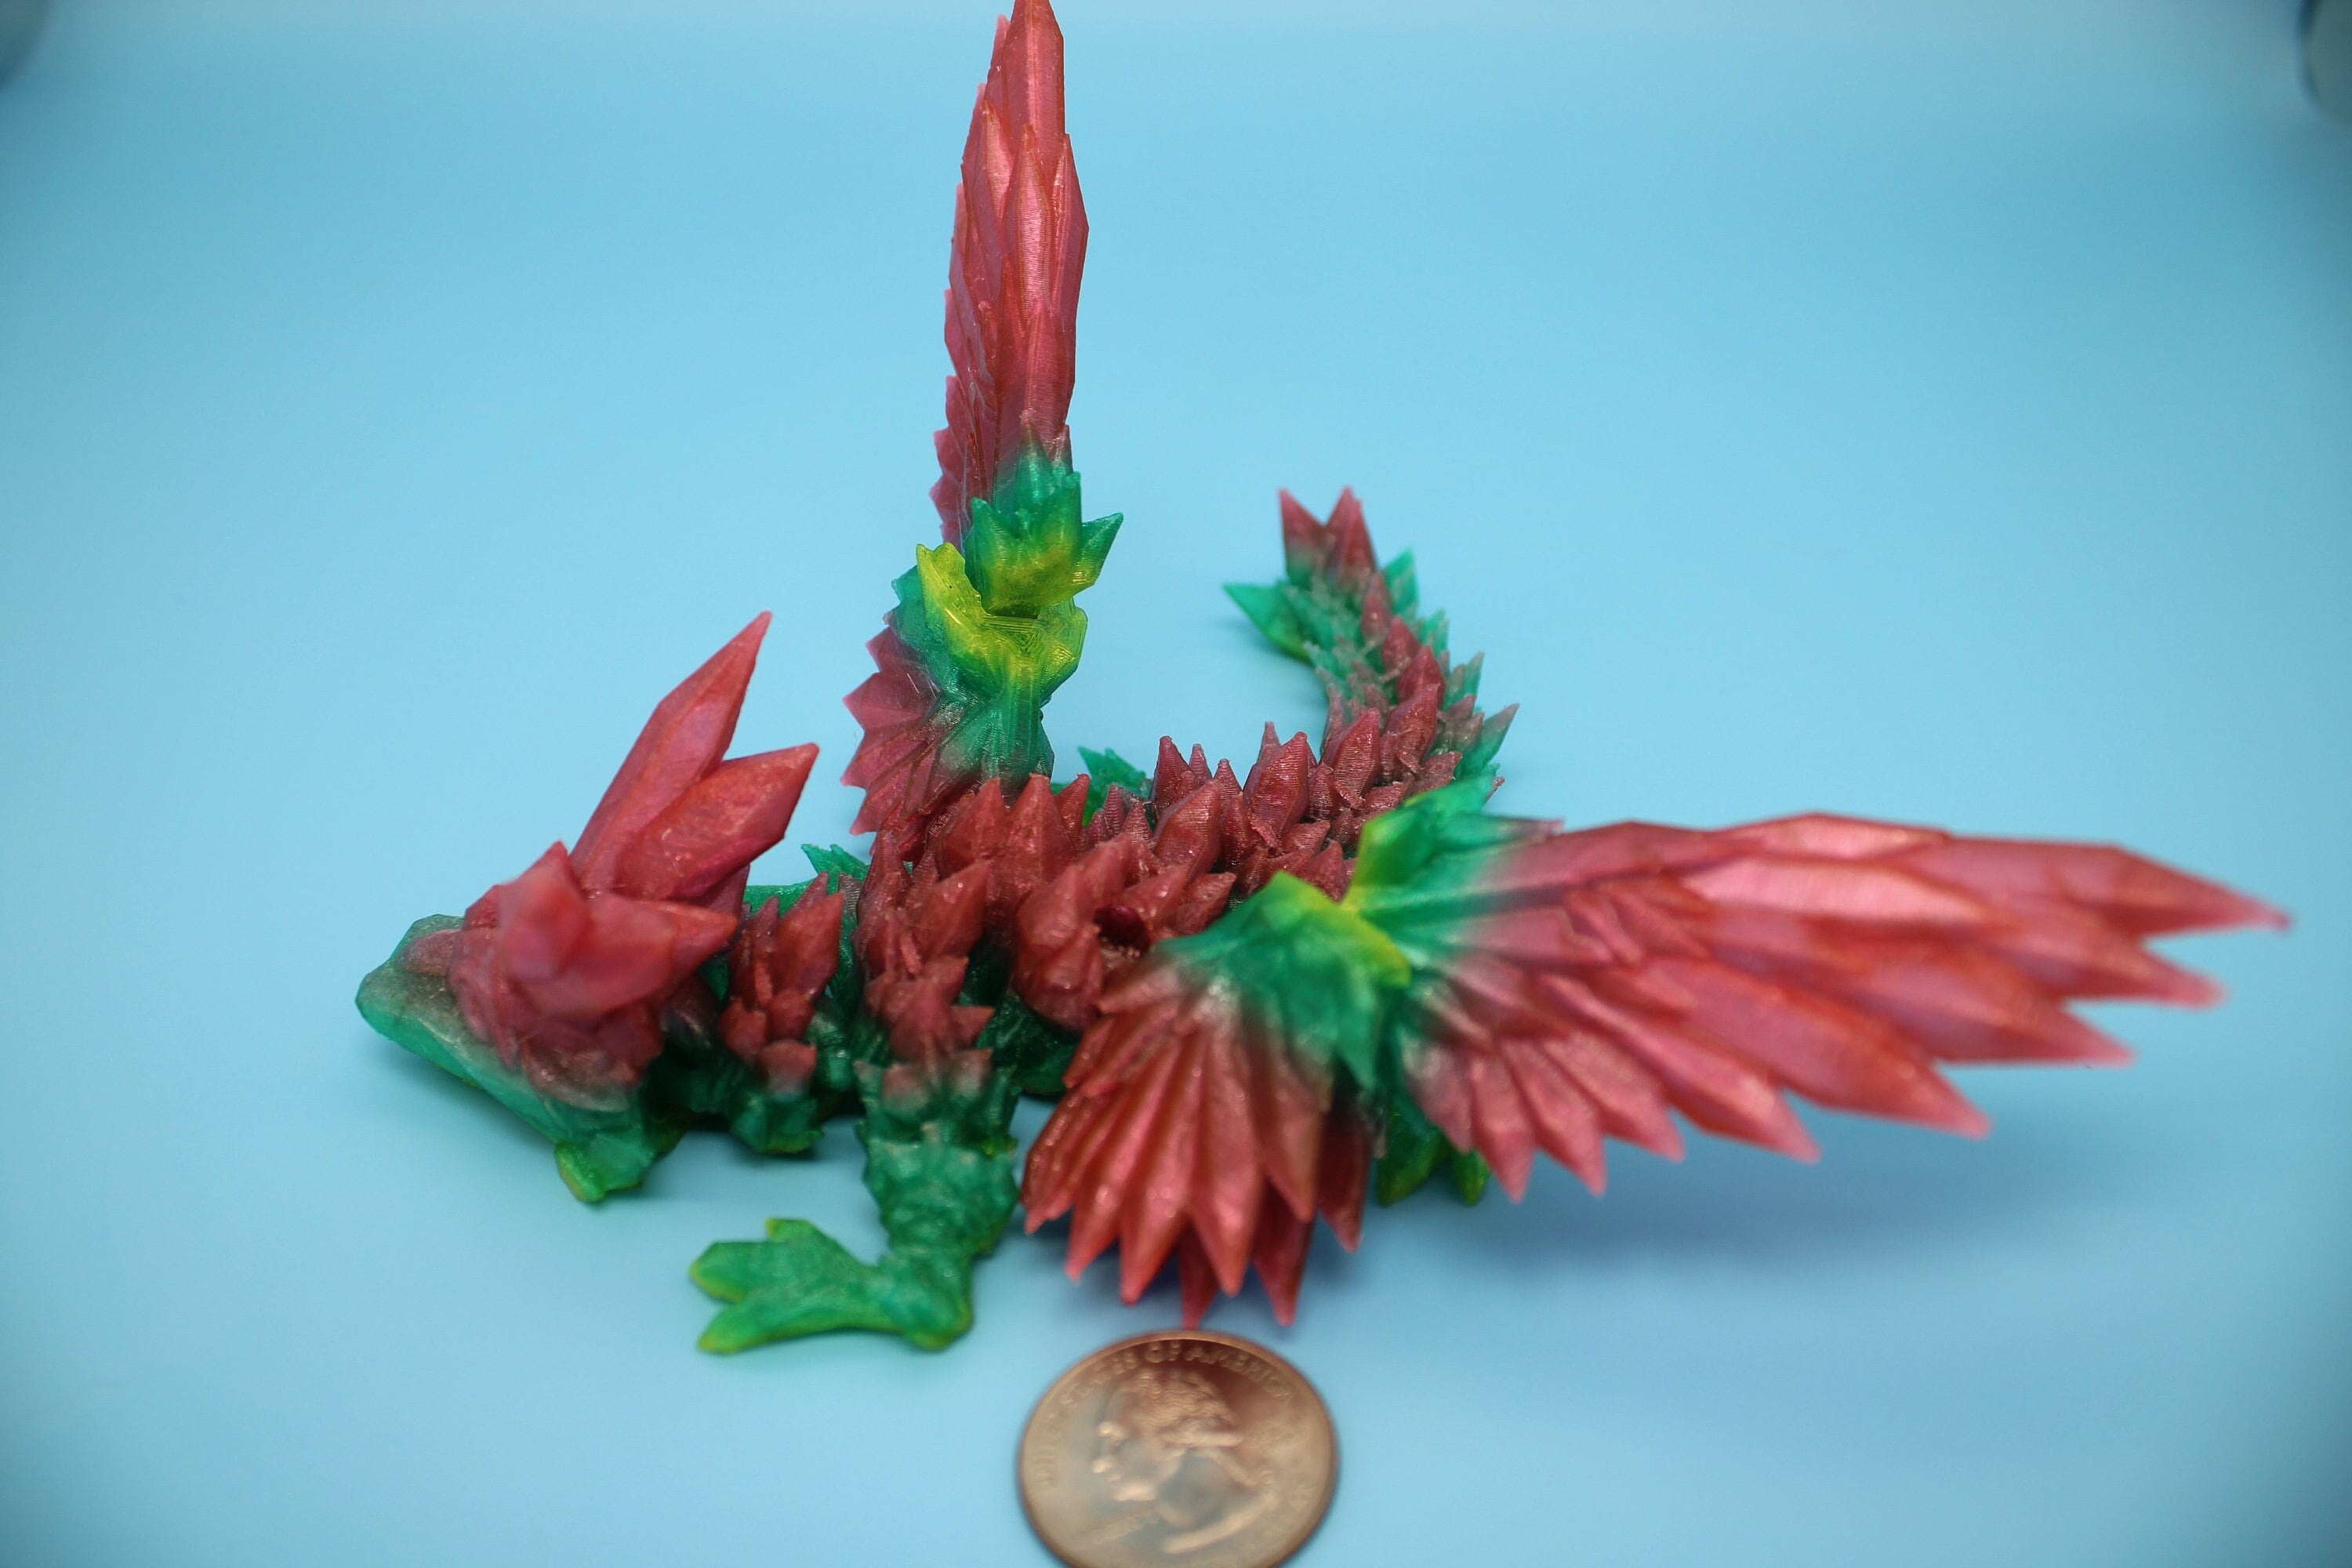 Flexible Miniature Baby Crystal Winged Dragon | Rainbow | 3D Printed Articulating Toy Fidget | Flexi Toy 7 in. head to tail | Stress Relief